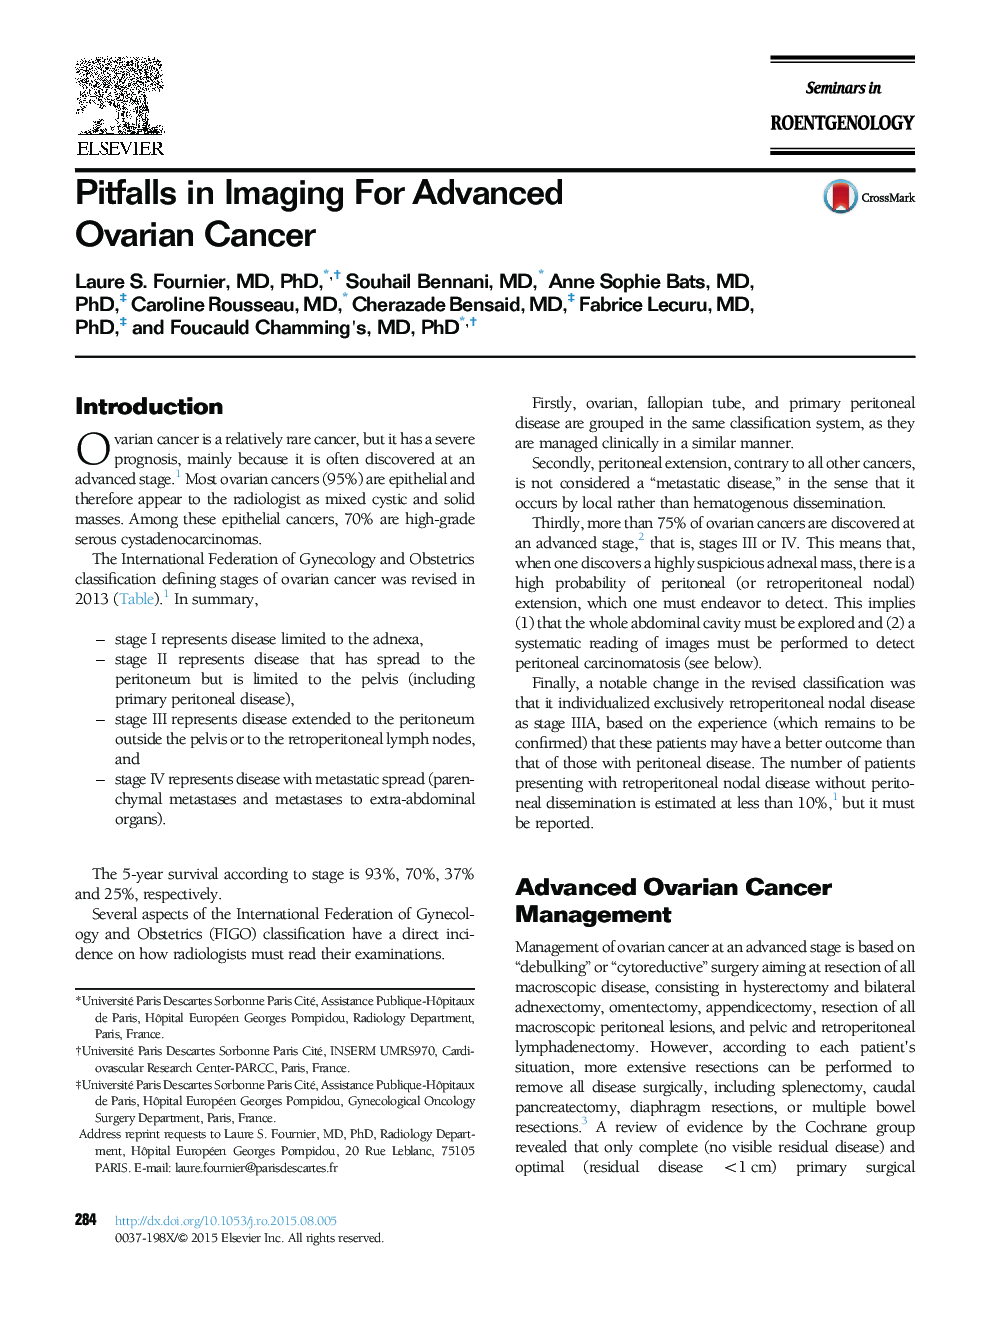 Pitfalls in Imaging For Advanced Ovarian Cancer